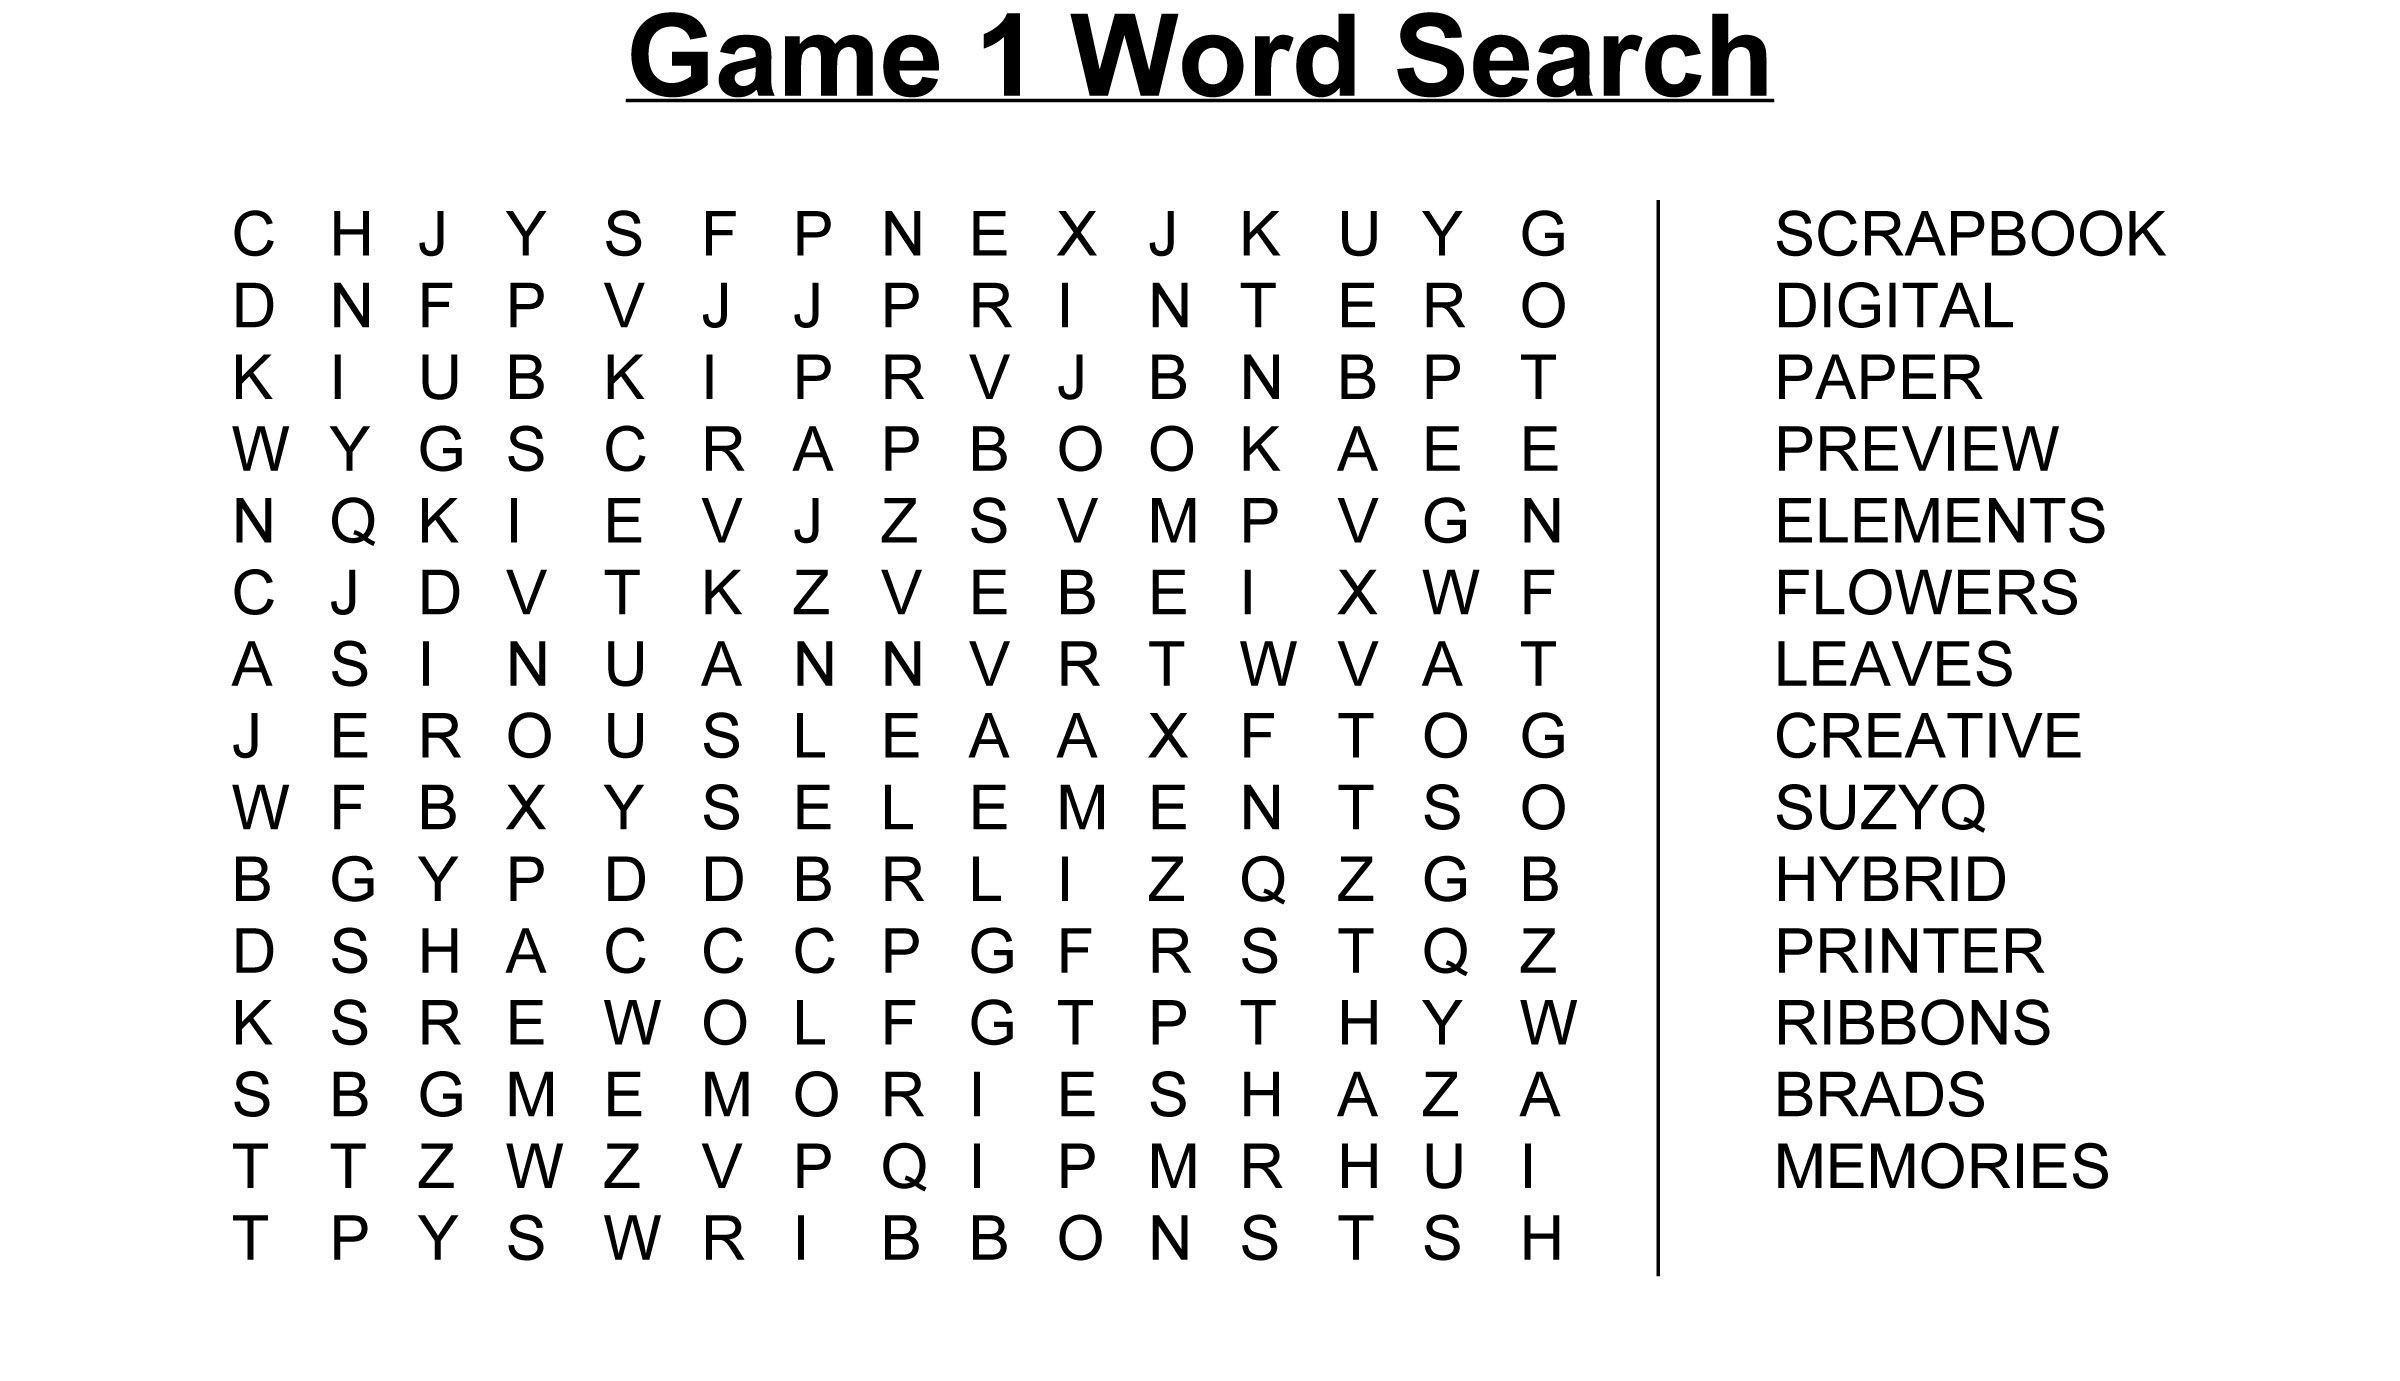 create-a-wordsearch-puzzle-for-free-printable-free-printable